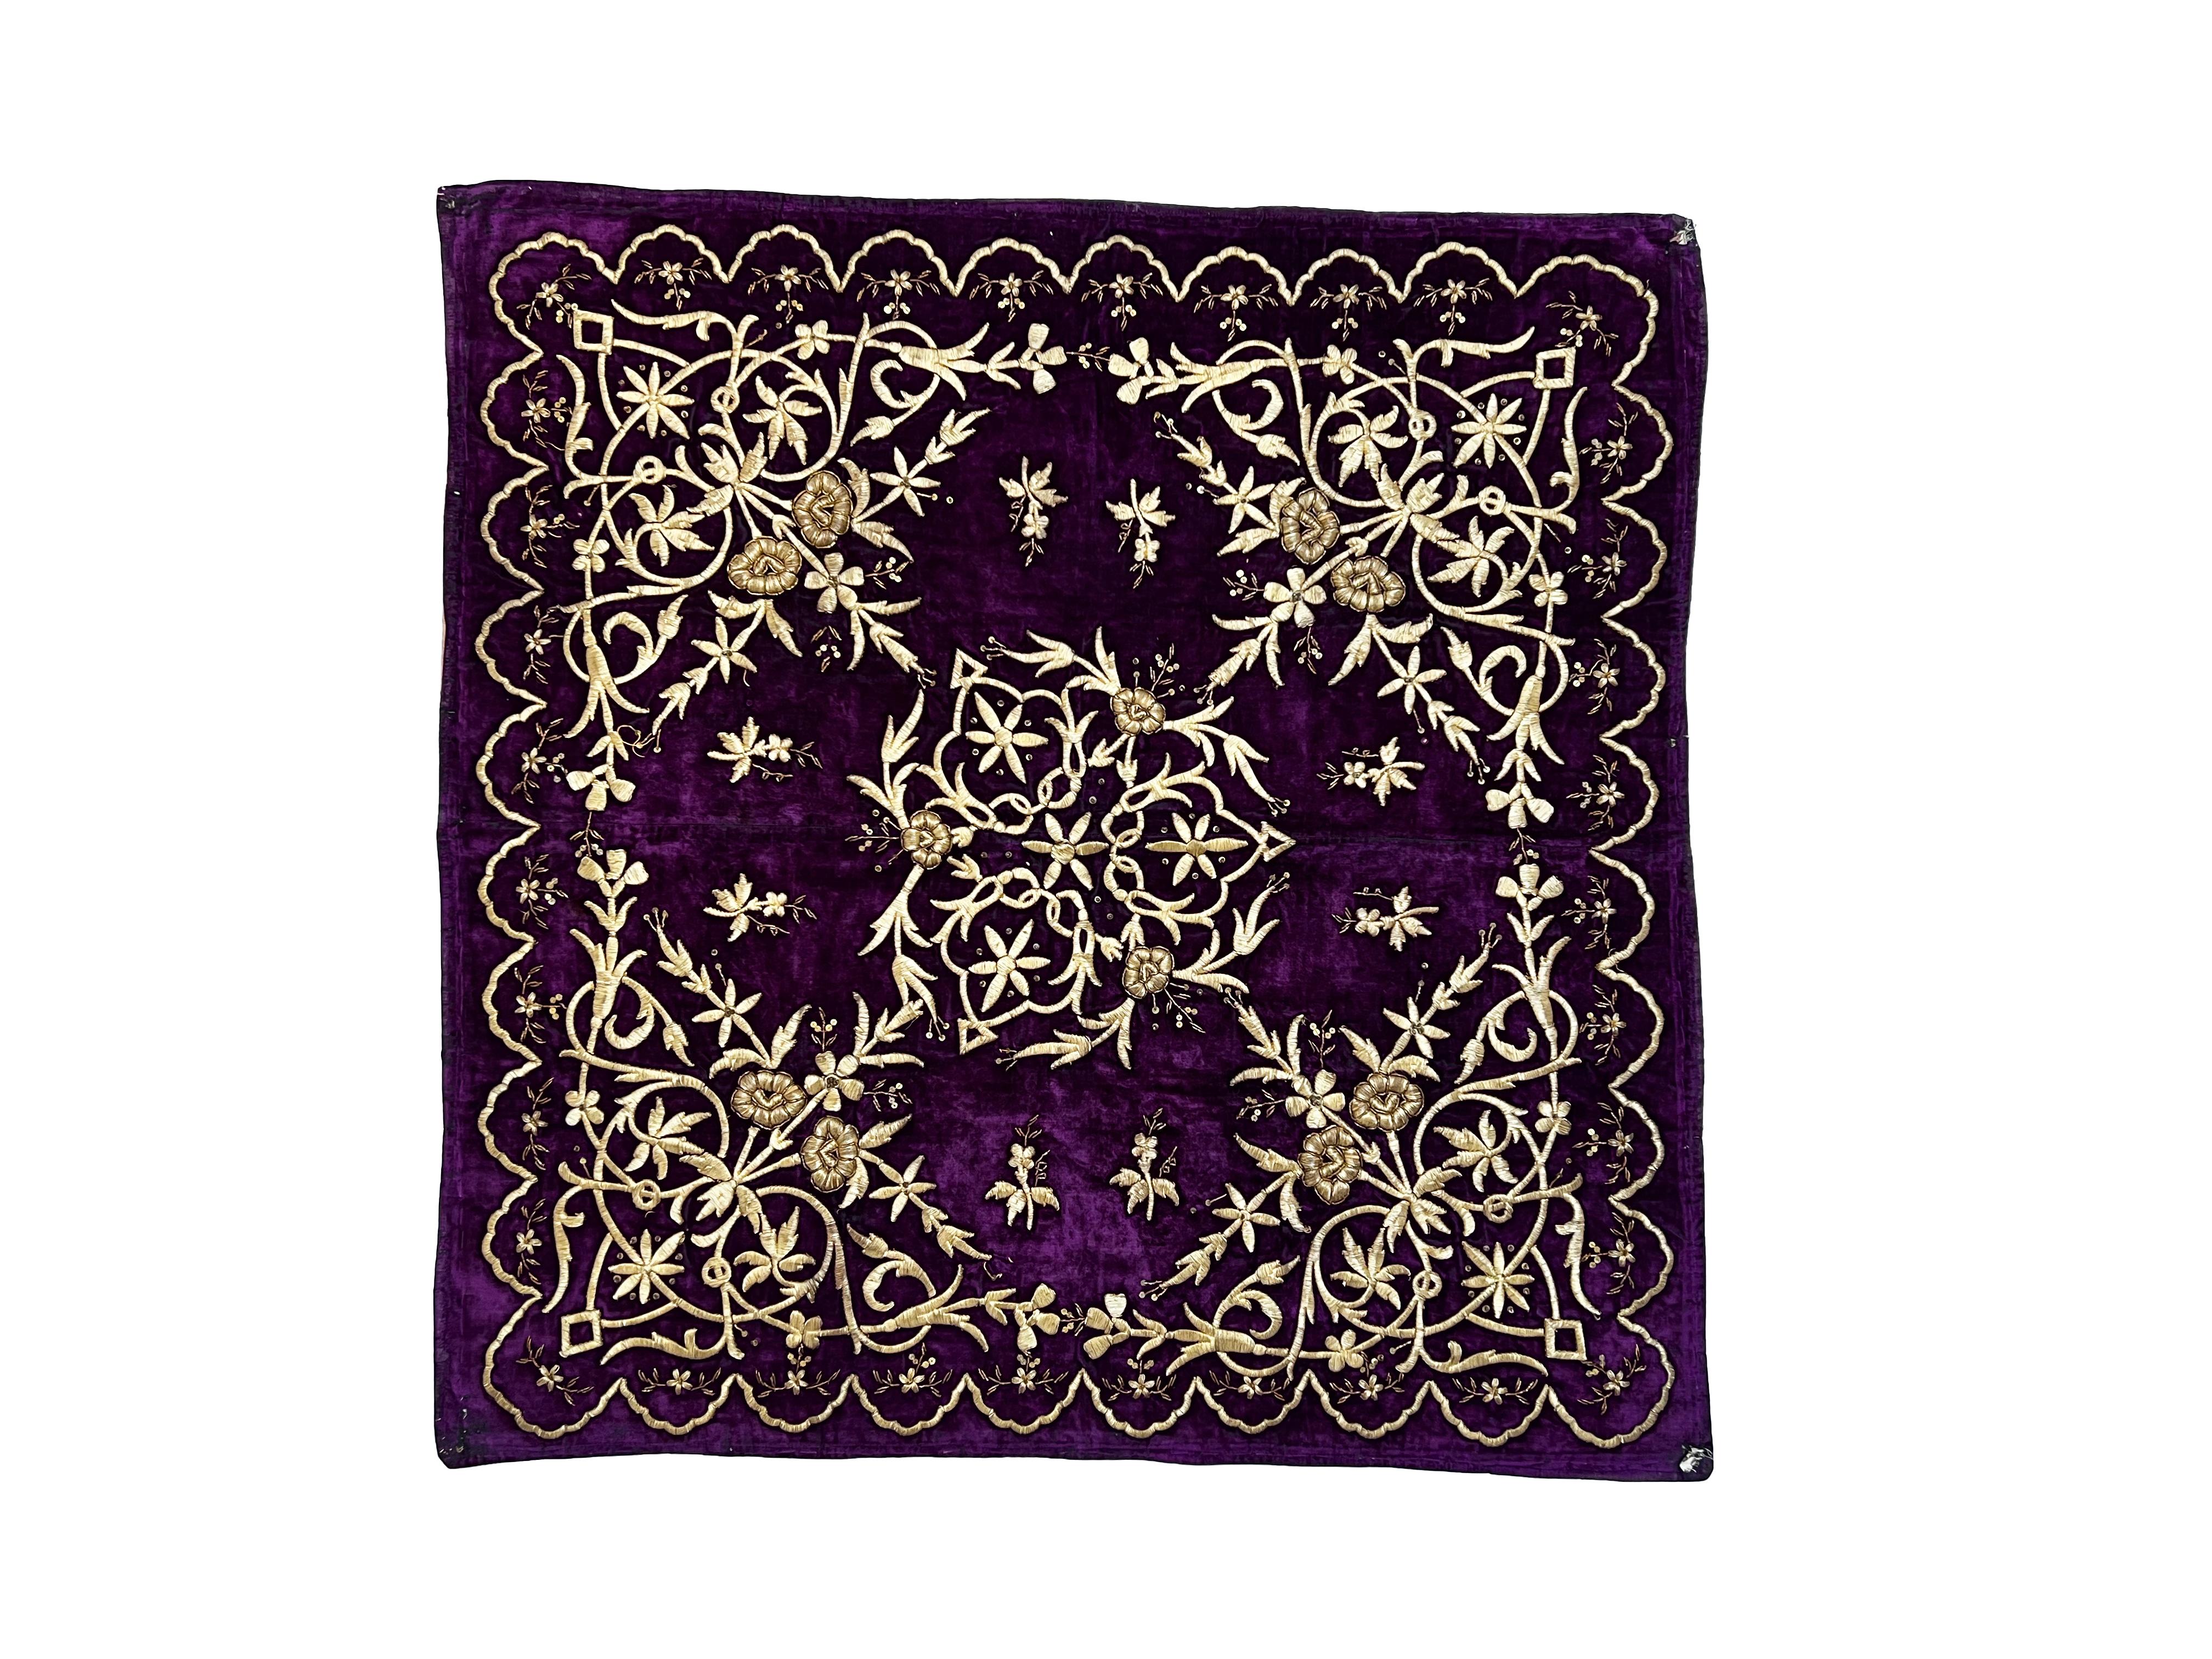 A fine six Ottoman velvet coverlet or hanging in different designs embroidered with gilt and silver metal threads. 

Dimension: Purple: H: 81cm, W: 81cm, 
Navy blue: H: 88cm, W: 85cm, 
Red: H: 82cm, W: 82cm, 
Navy: H: 80cm, W: 81cm, 
Navy blue